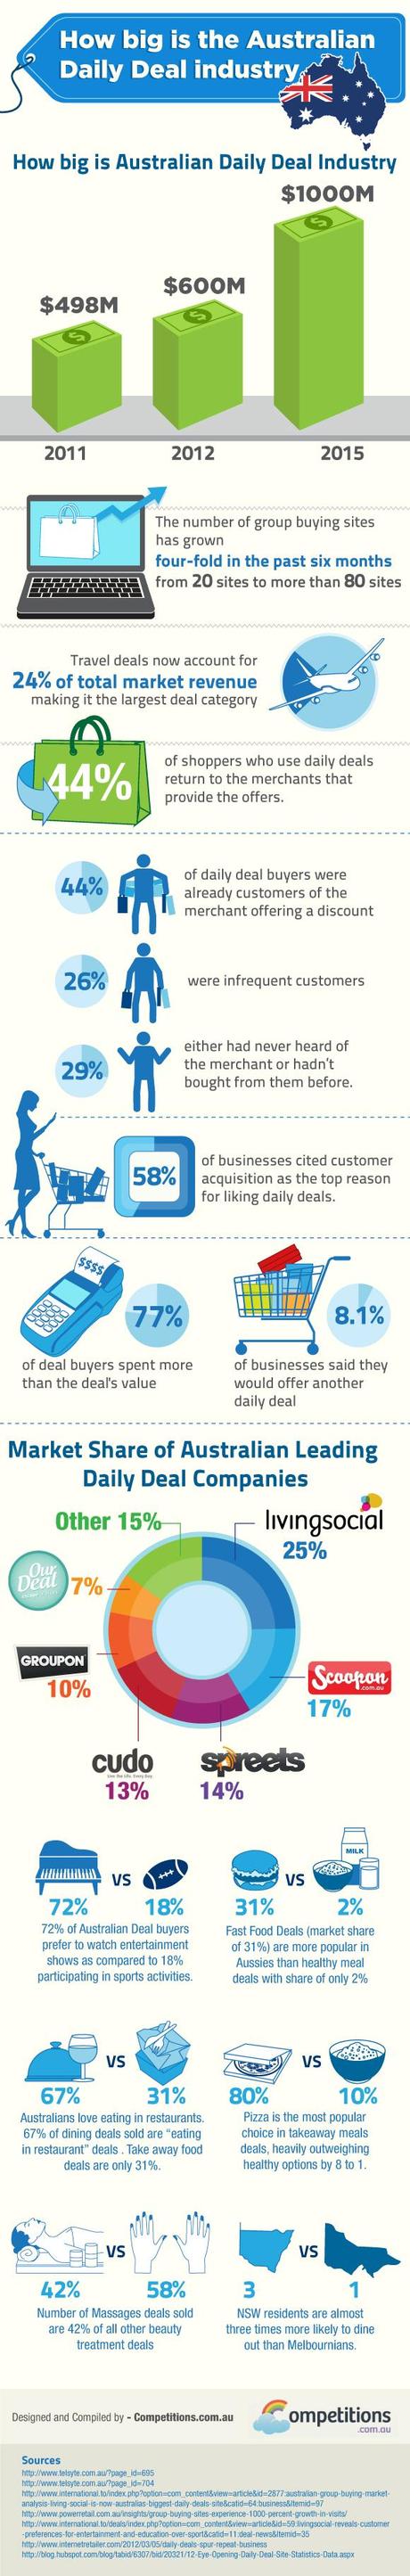 Daily Deal Industry in Australia Infographic